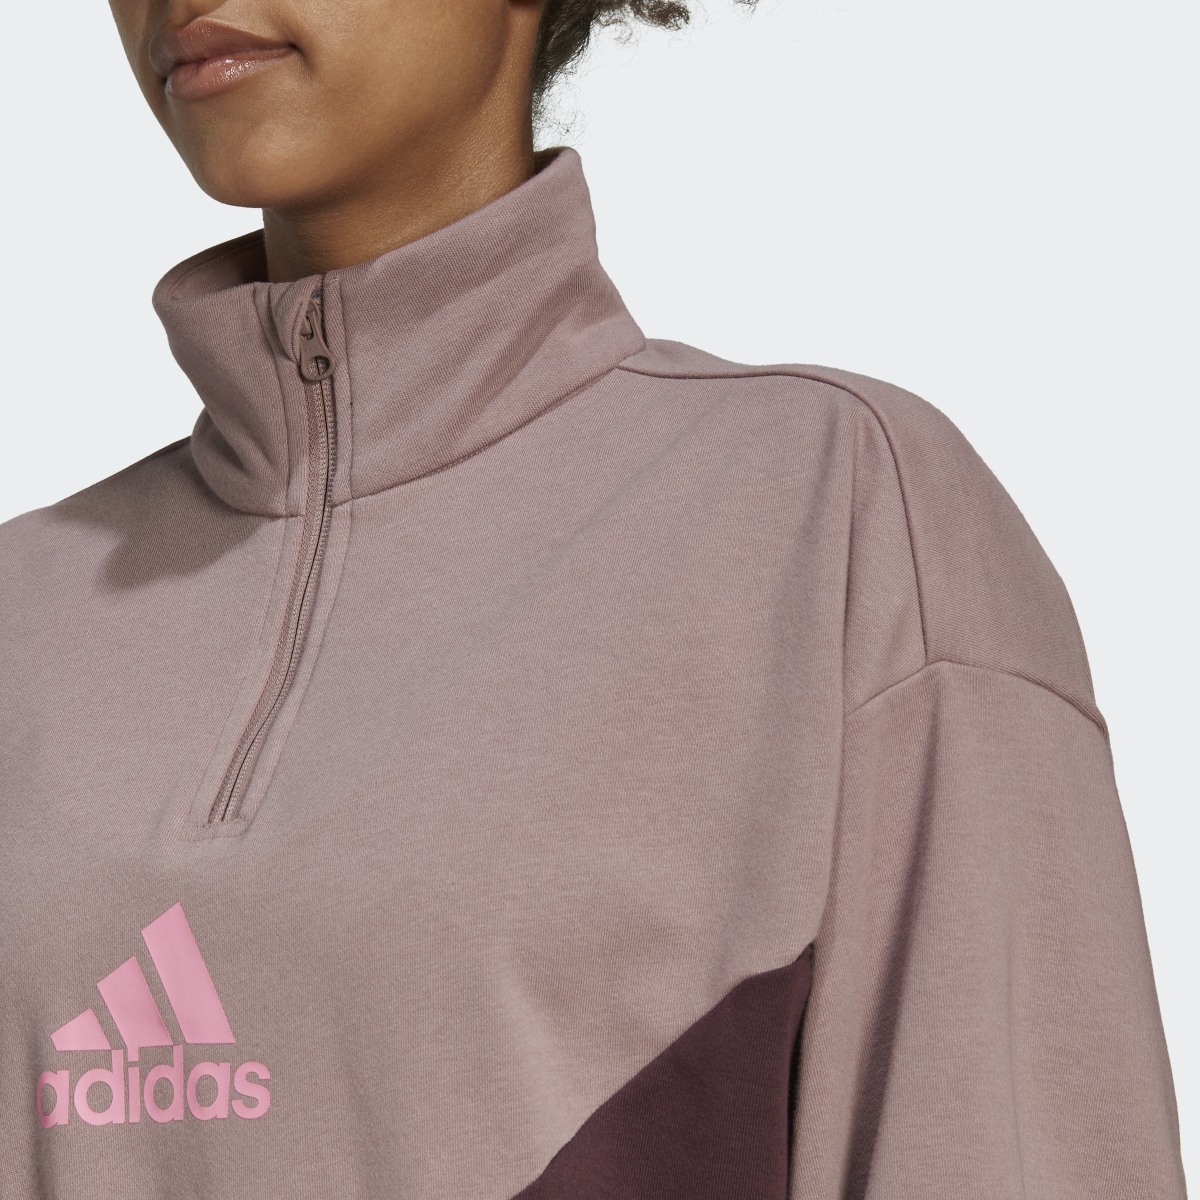 Adidas Half-Zip and Tights Tracksuit. 6